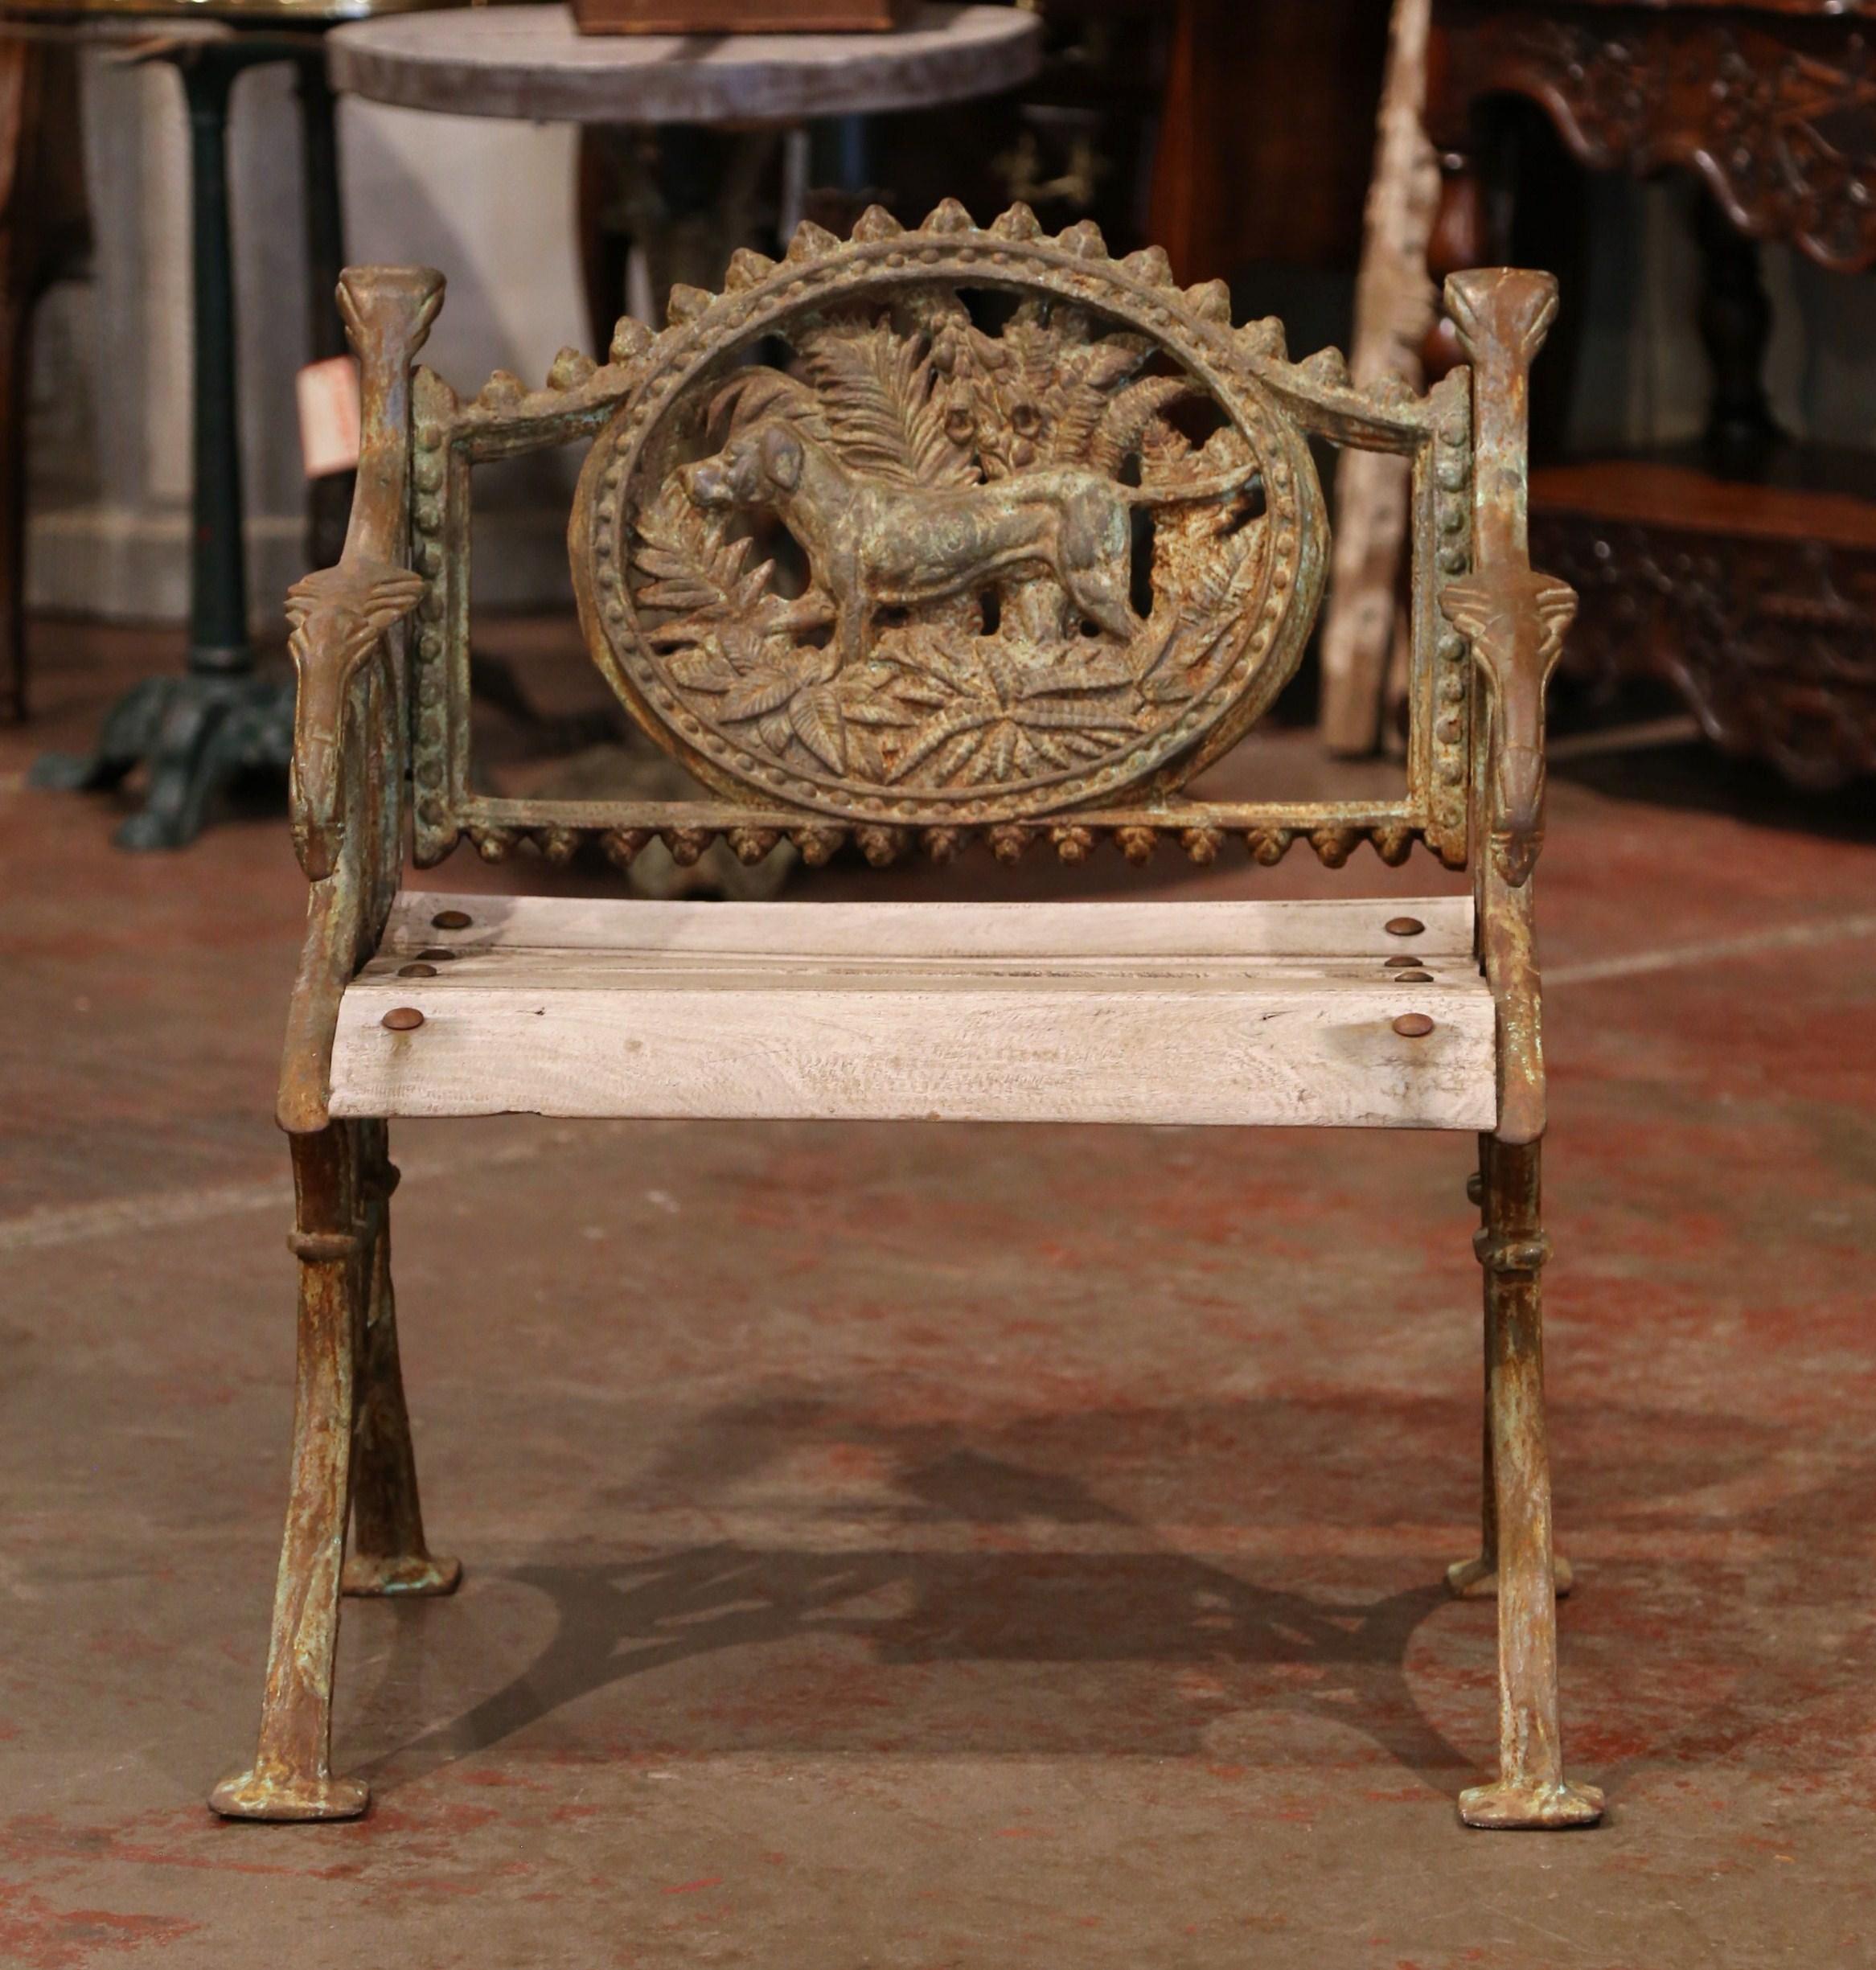 Decorate a patio with this antique outdoor chair. Crafted in France circa 1960, the armchair is made of iron and teak wood. It sits on curved feet decorated with bird motifs, and features an arched back decorated with a carved dog sculpture. The